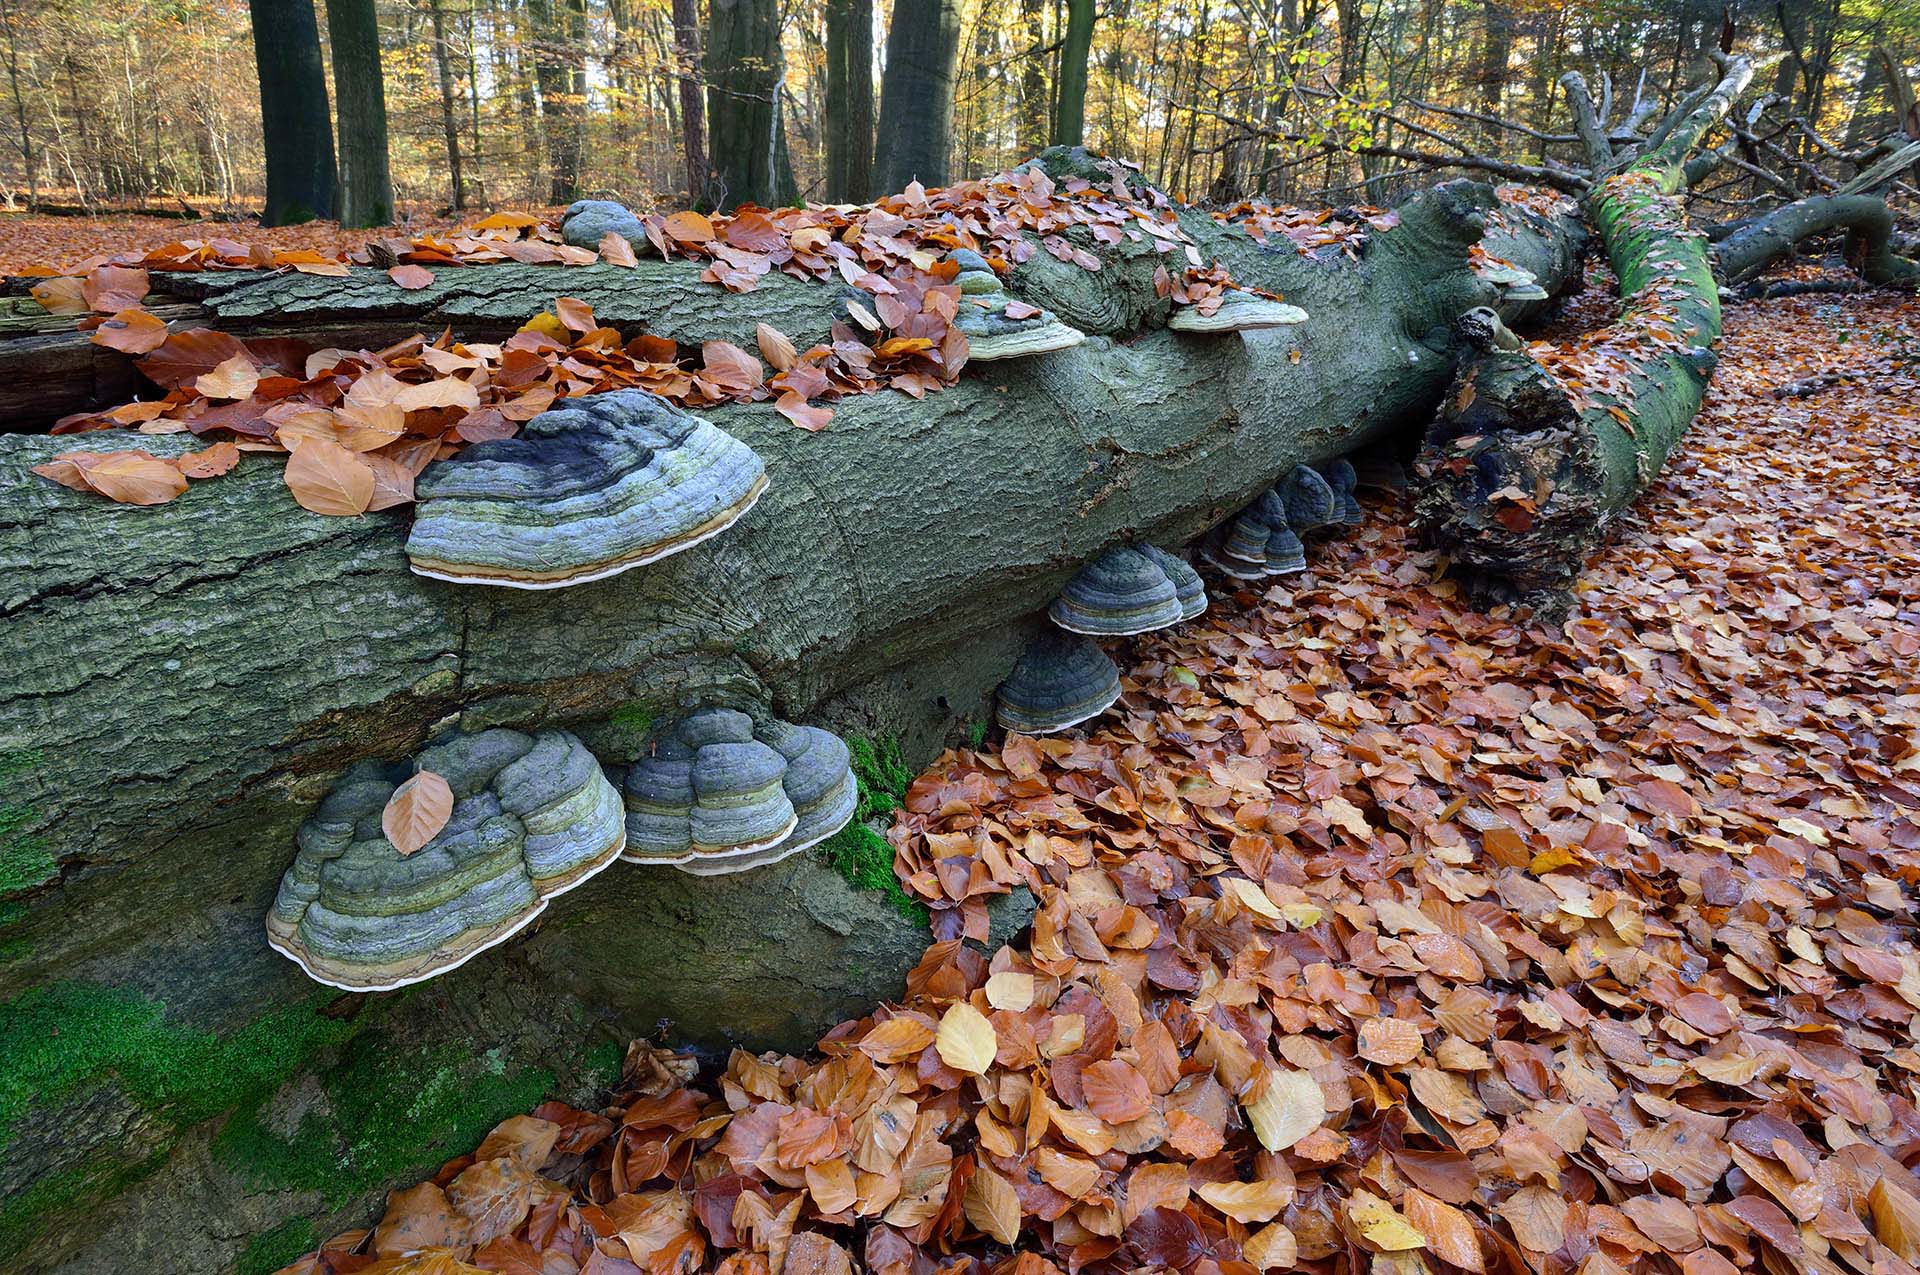 Mushrooms on a fallen tree in the forest of Ameronge Bos